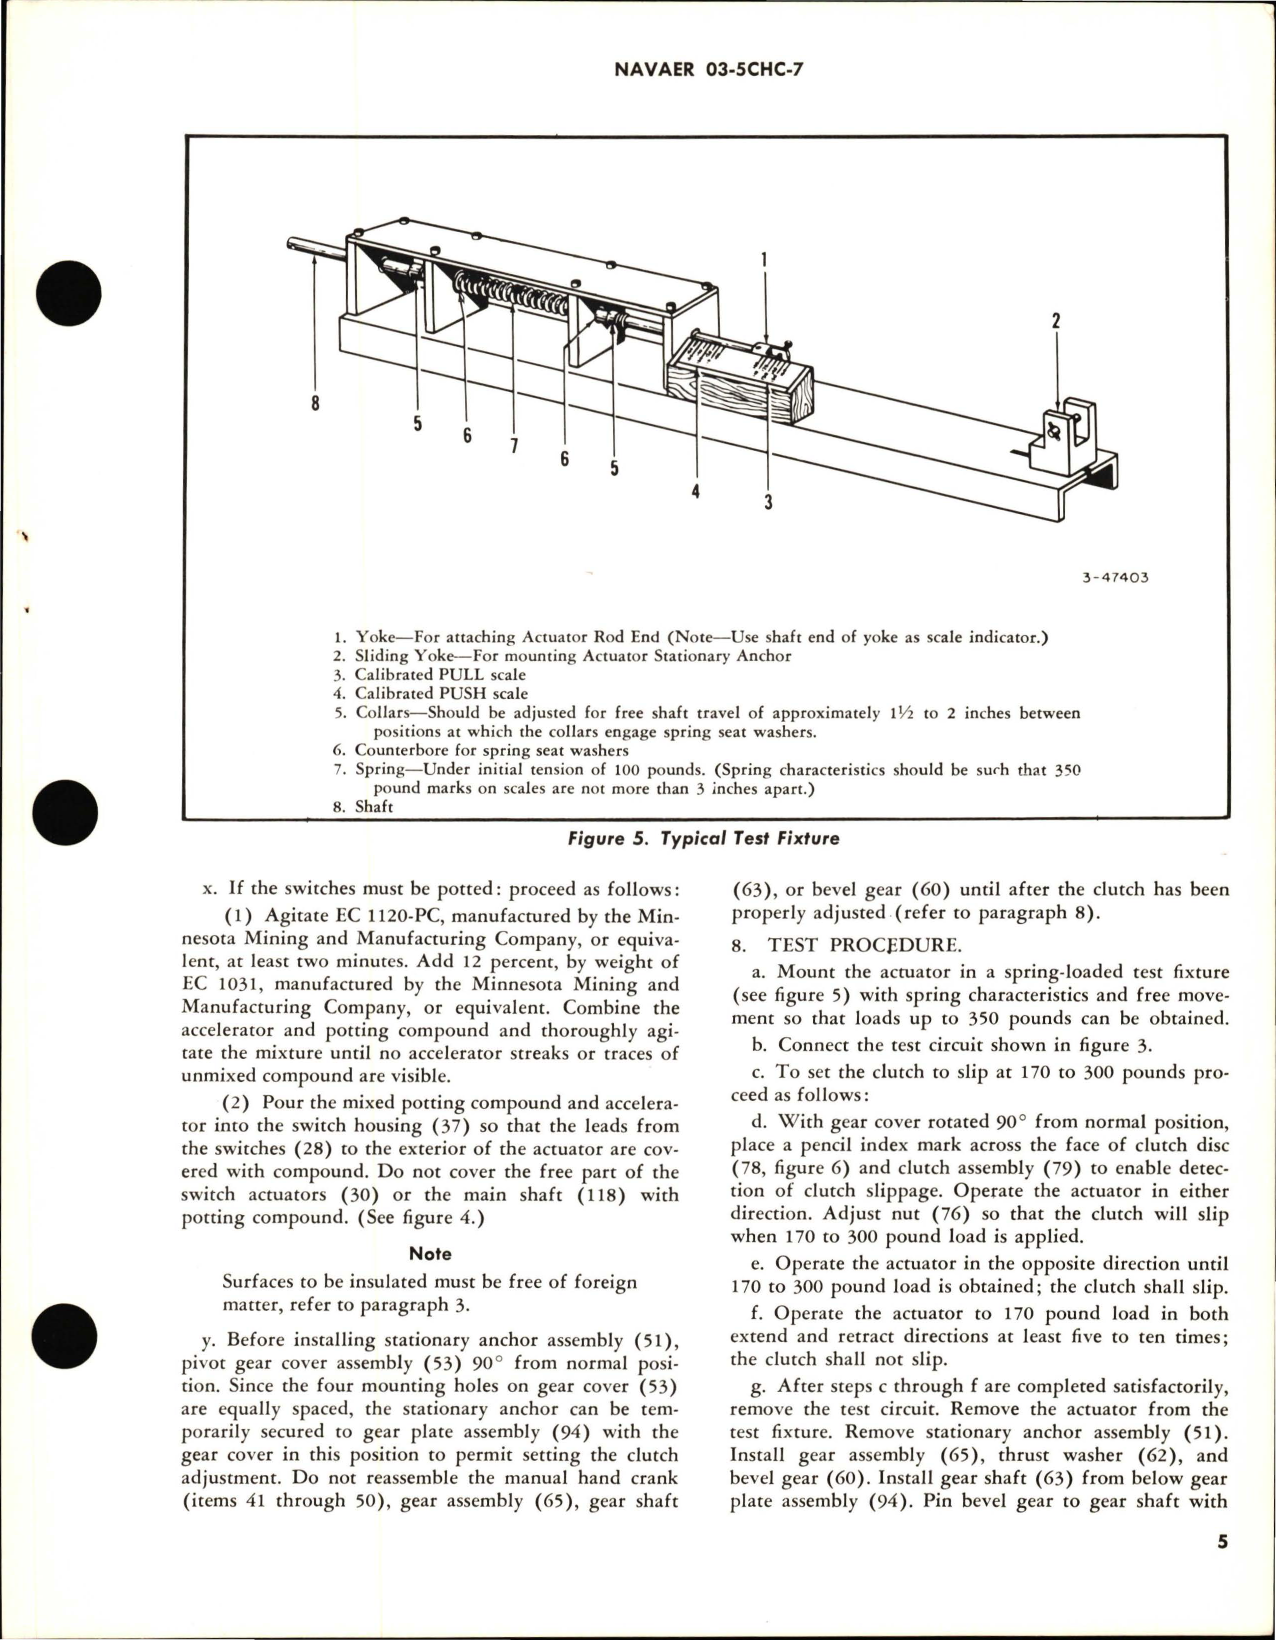 Sample page 5 from AirCorps Library document: Overhaul Instructions with Illustrated Parts Breakdown for Electromechanical Linear Actuator - RYLC 4900-2 